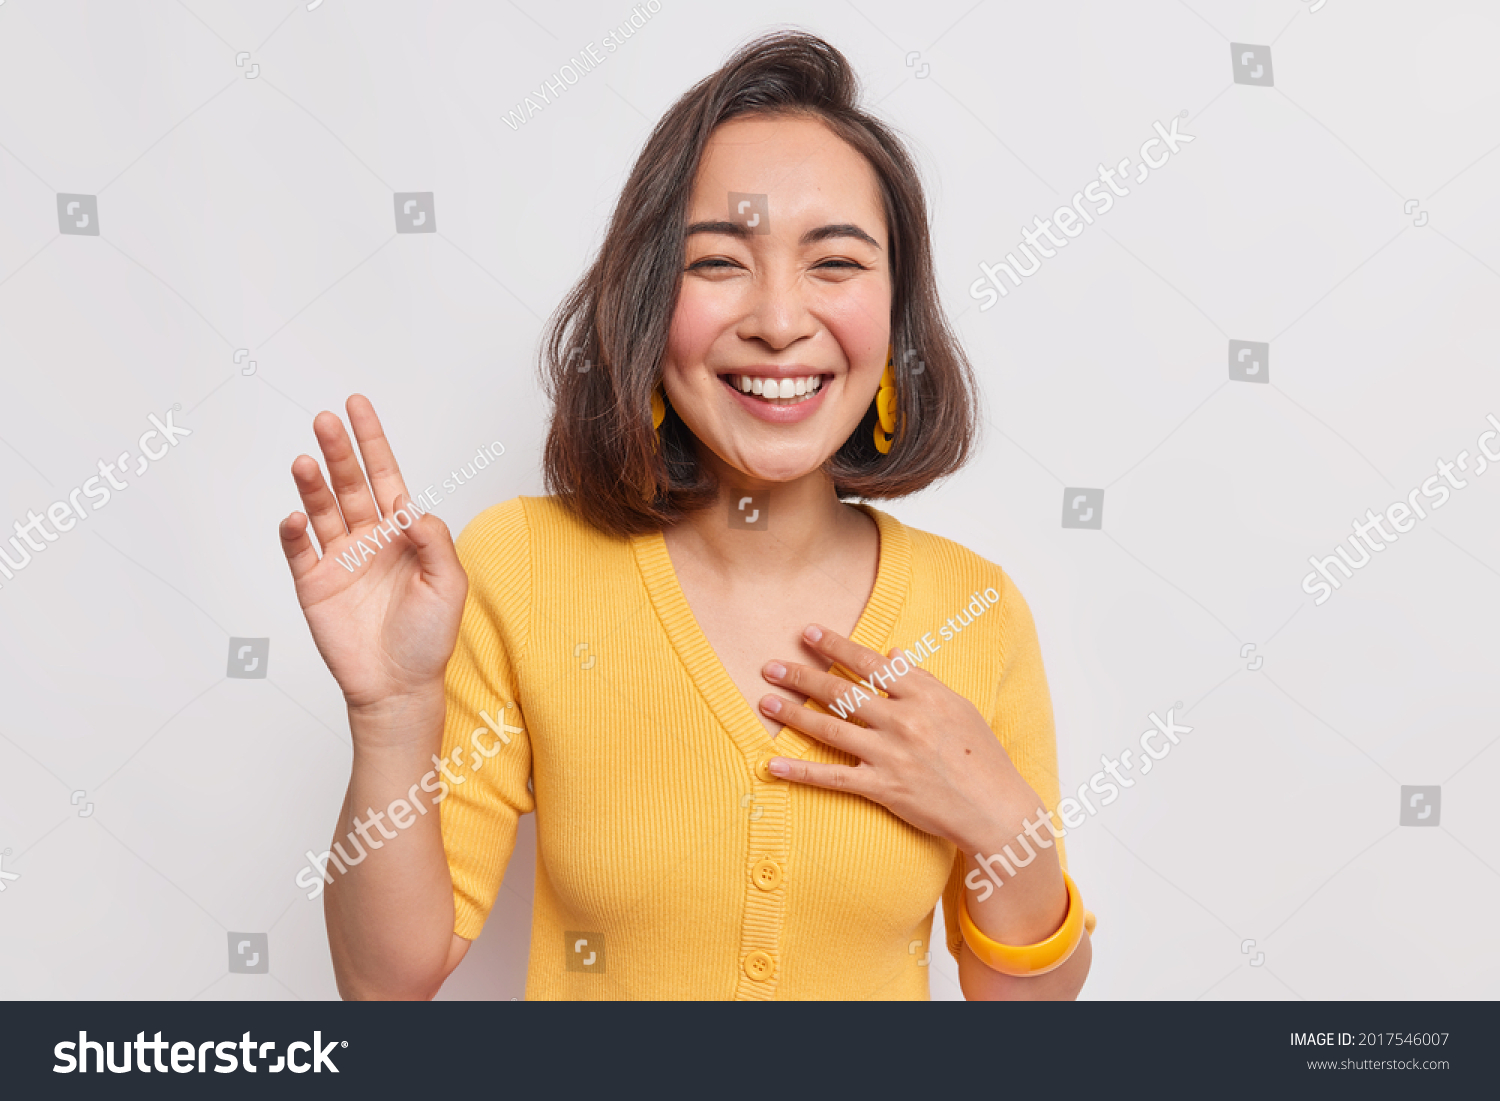 Happy dark haired pretty Asian woman with positive expression laughs joyfully keeps hand raised smiles broadly wears yellow jumper earrings hears something funny isolated over white background. #2017546007